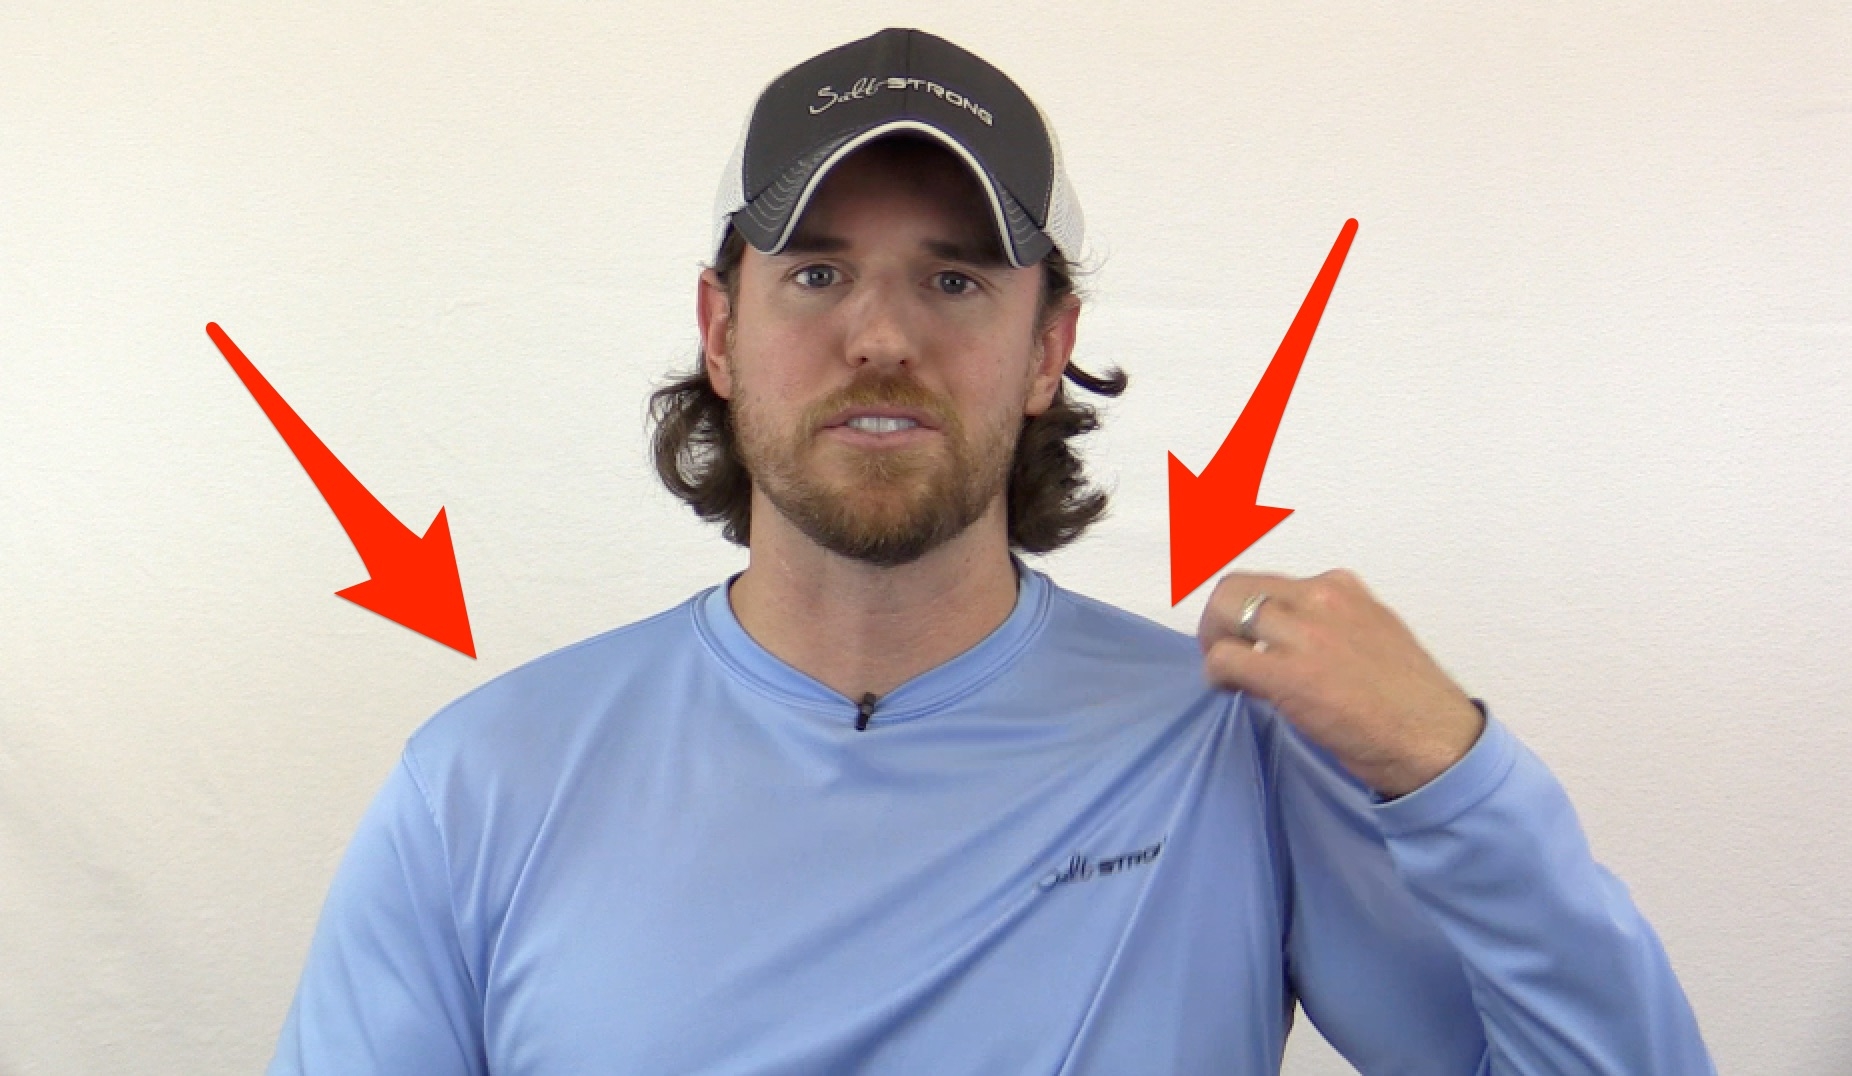 The Ultimate Microfiber Performance Fishing Shirt Guide.